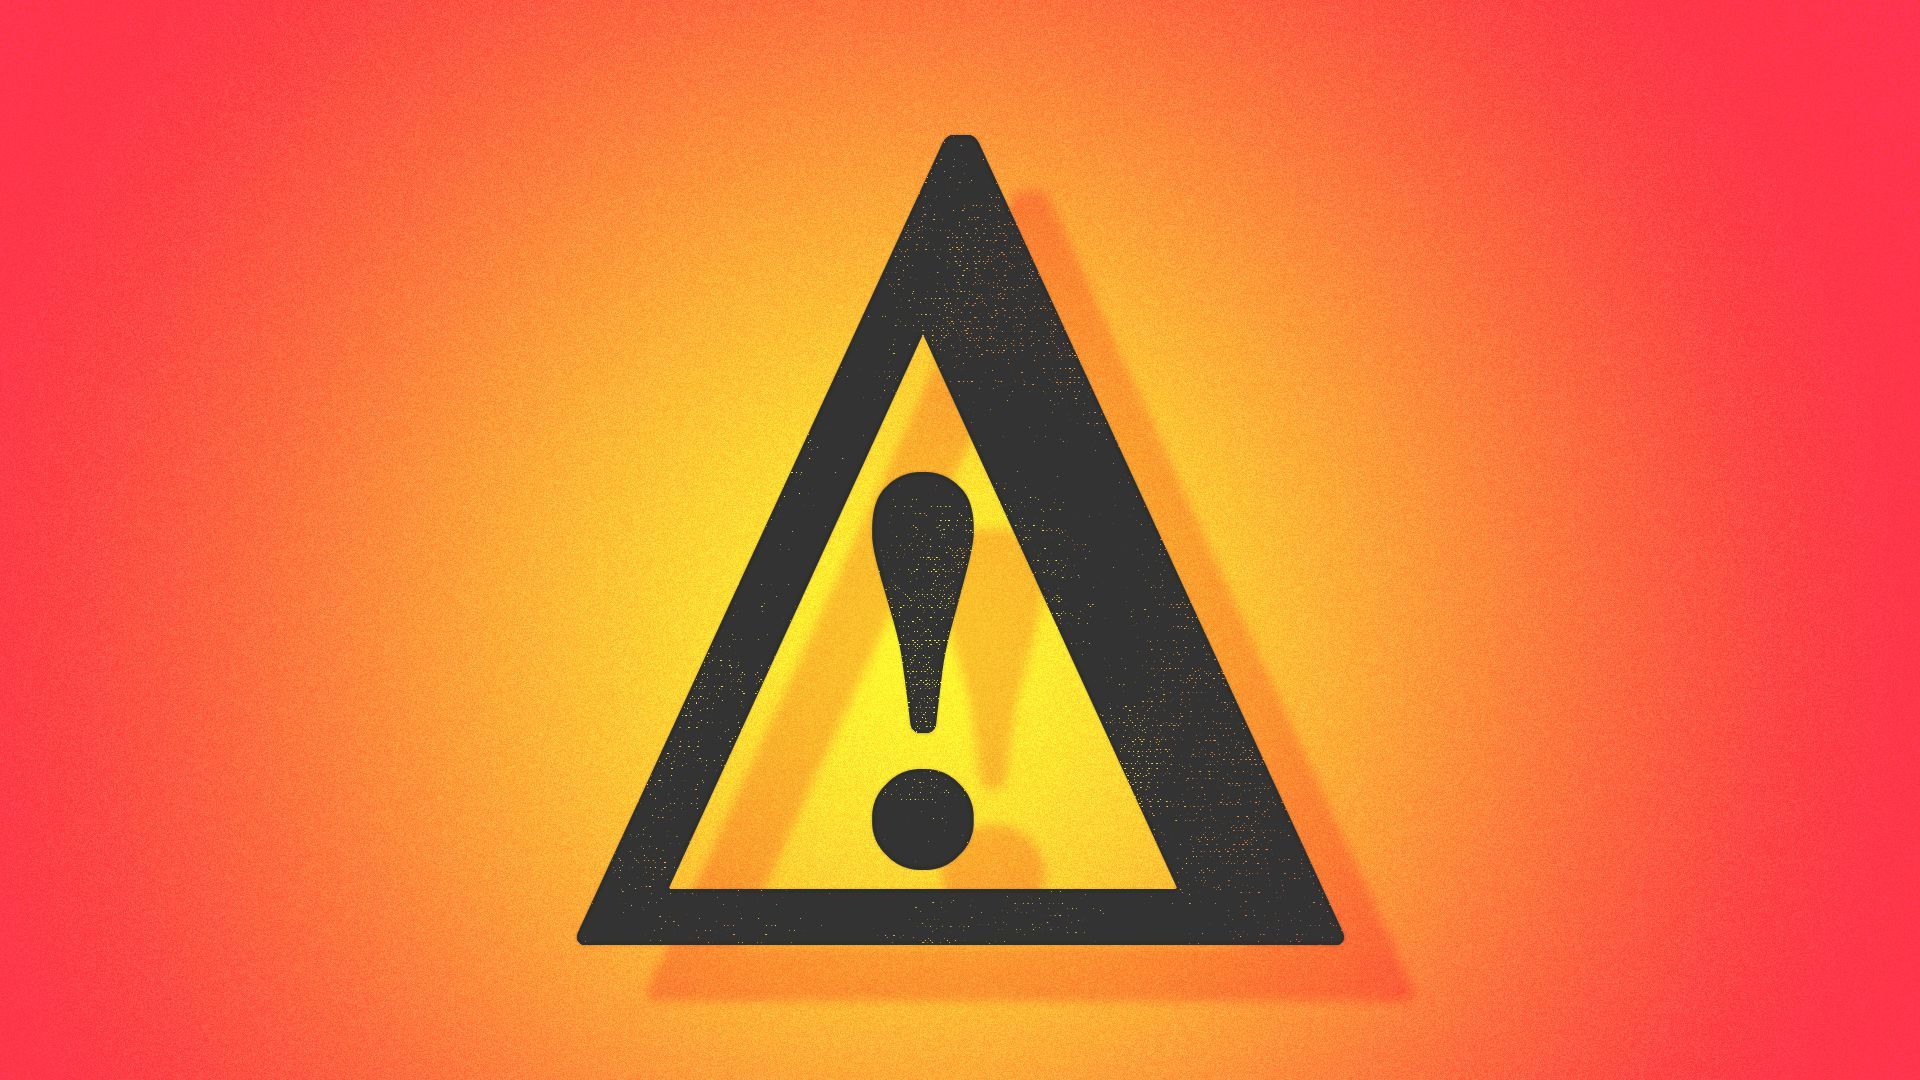 Illustration of a warning sign made of the letter delta and an exclamation point inside it.